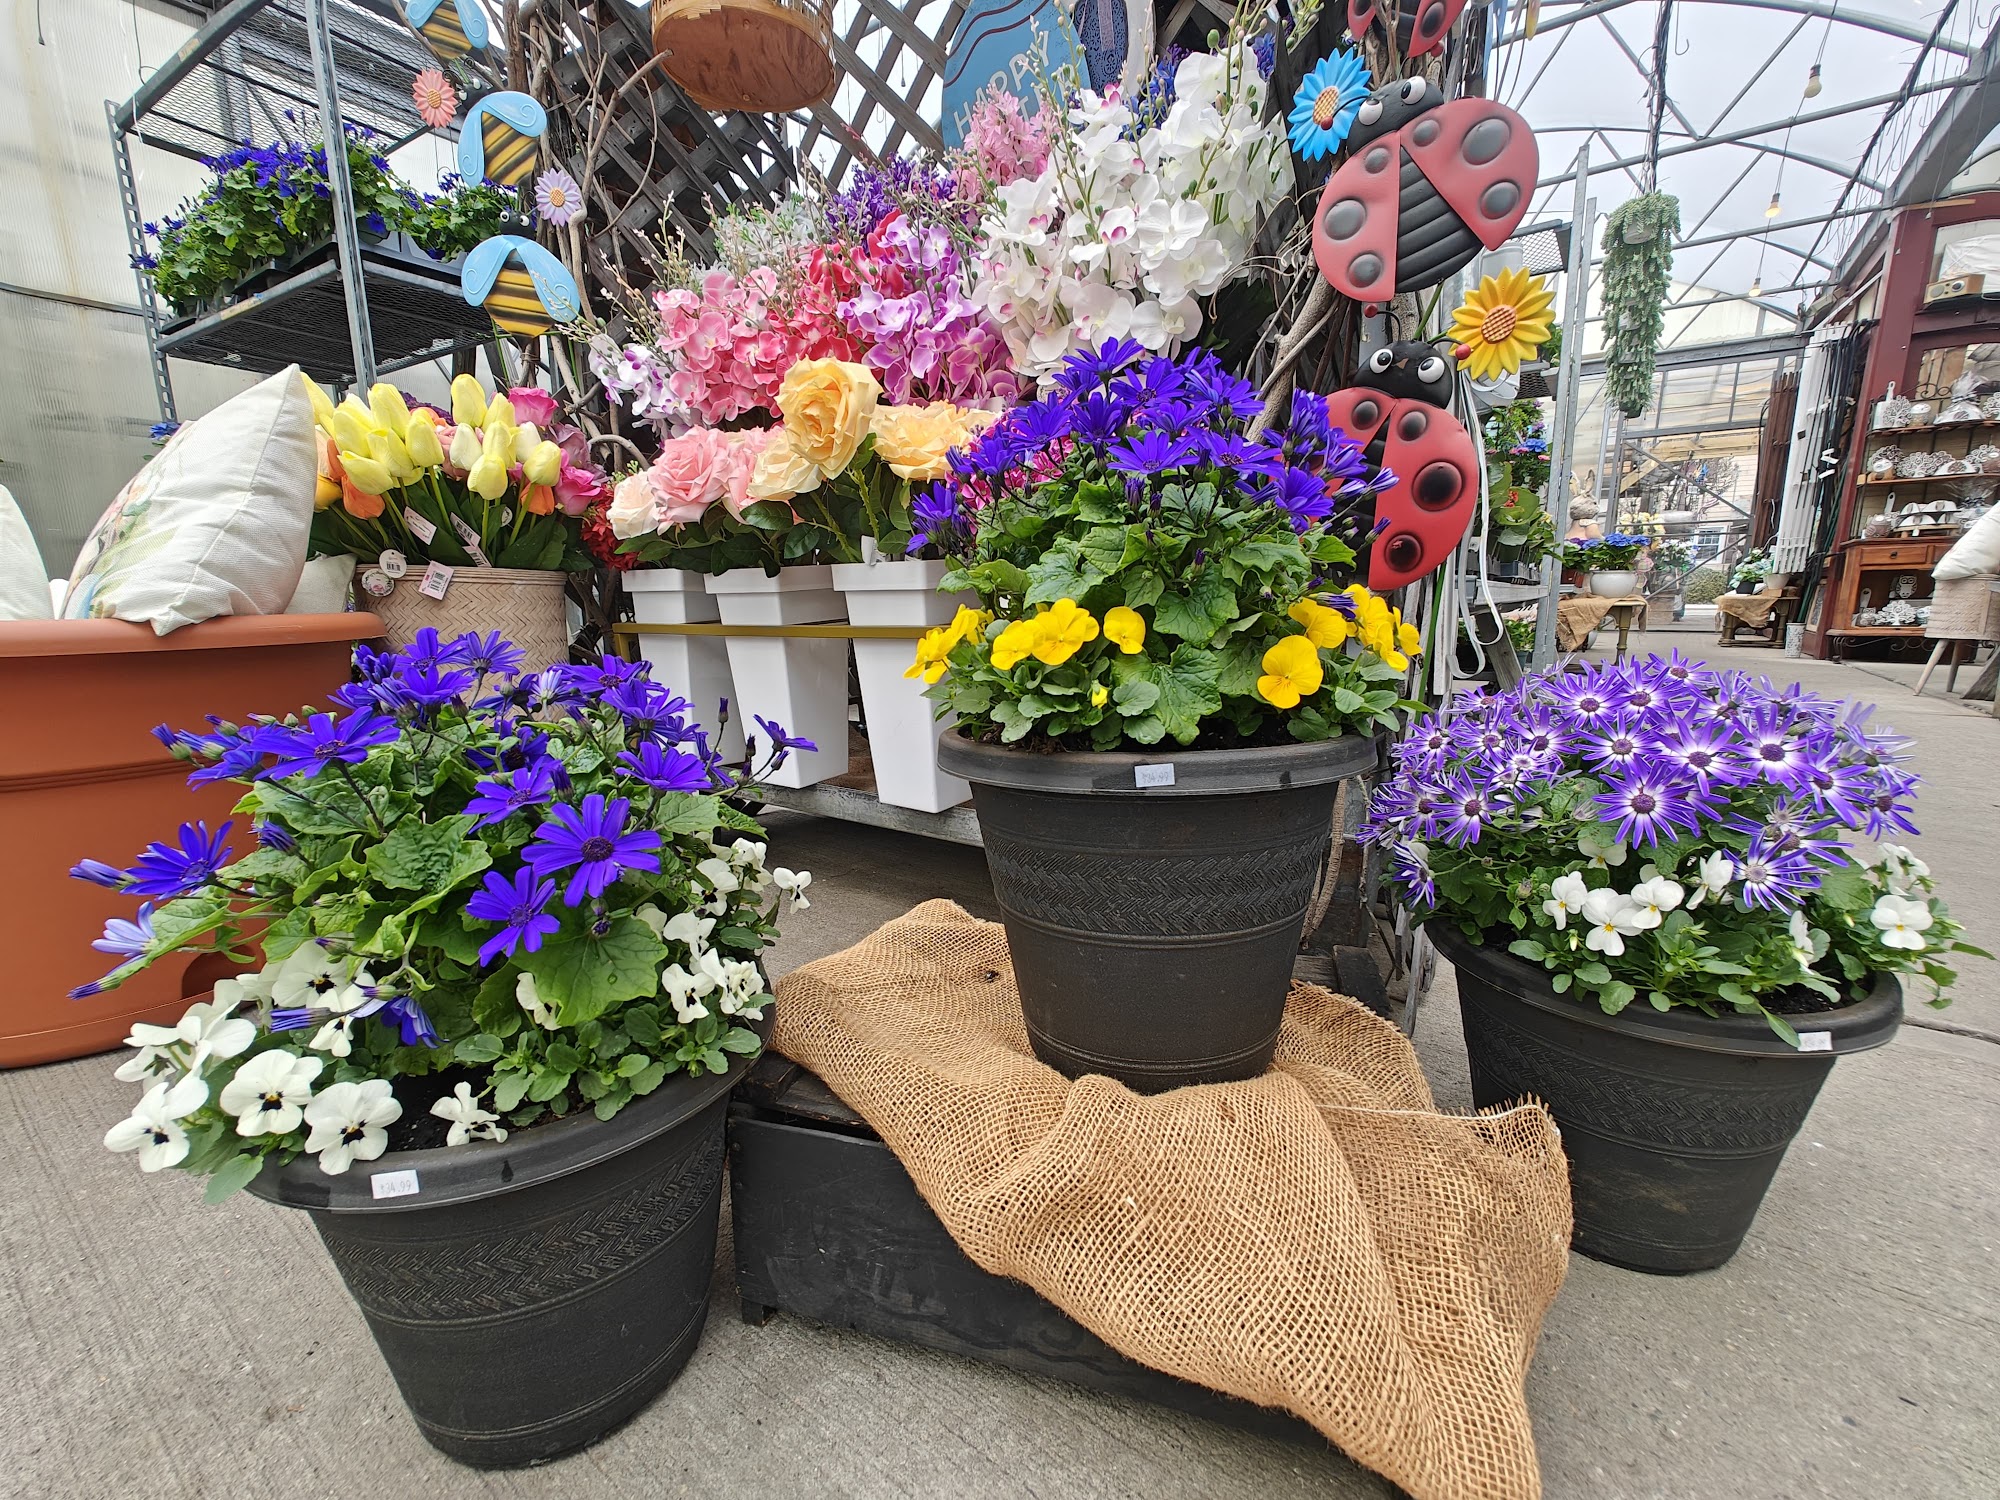 Lily's Carle Place Garden Center 542 Westbury Ave, Carle Place New York 11514